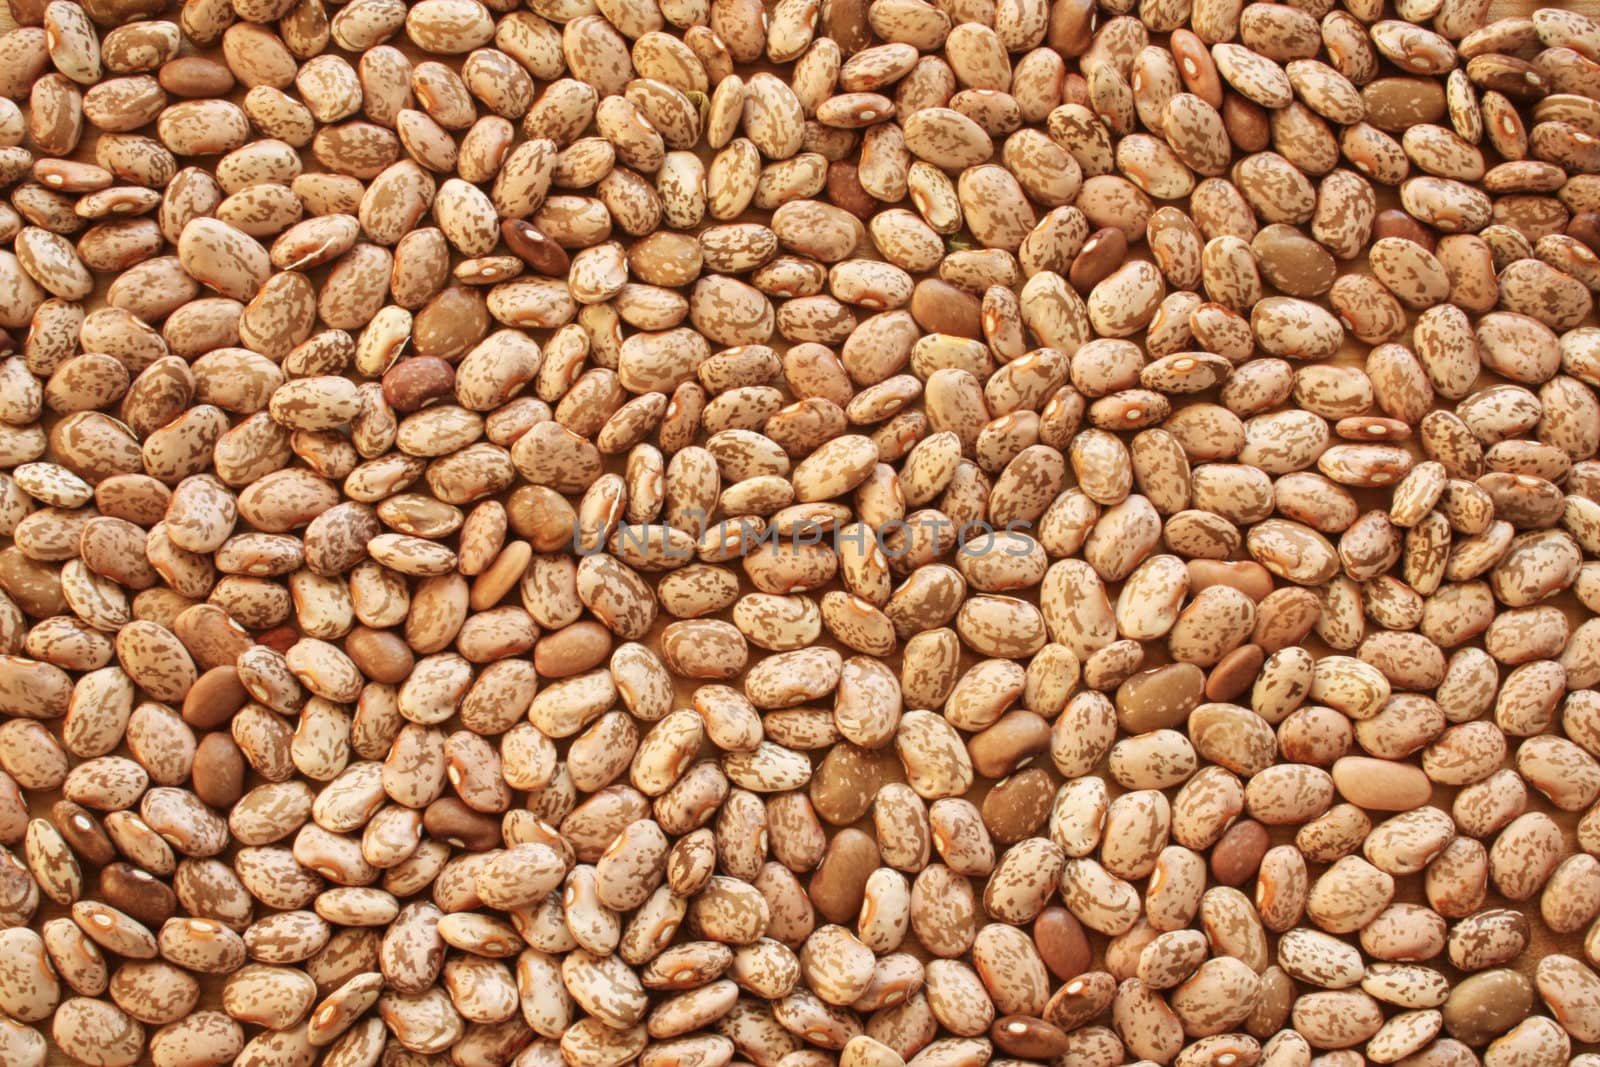 A close-up background or wallpaper image of heirloom dry Pinto beans.